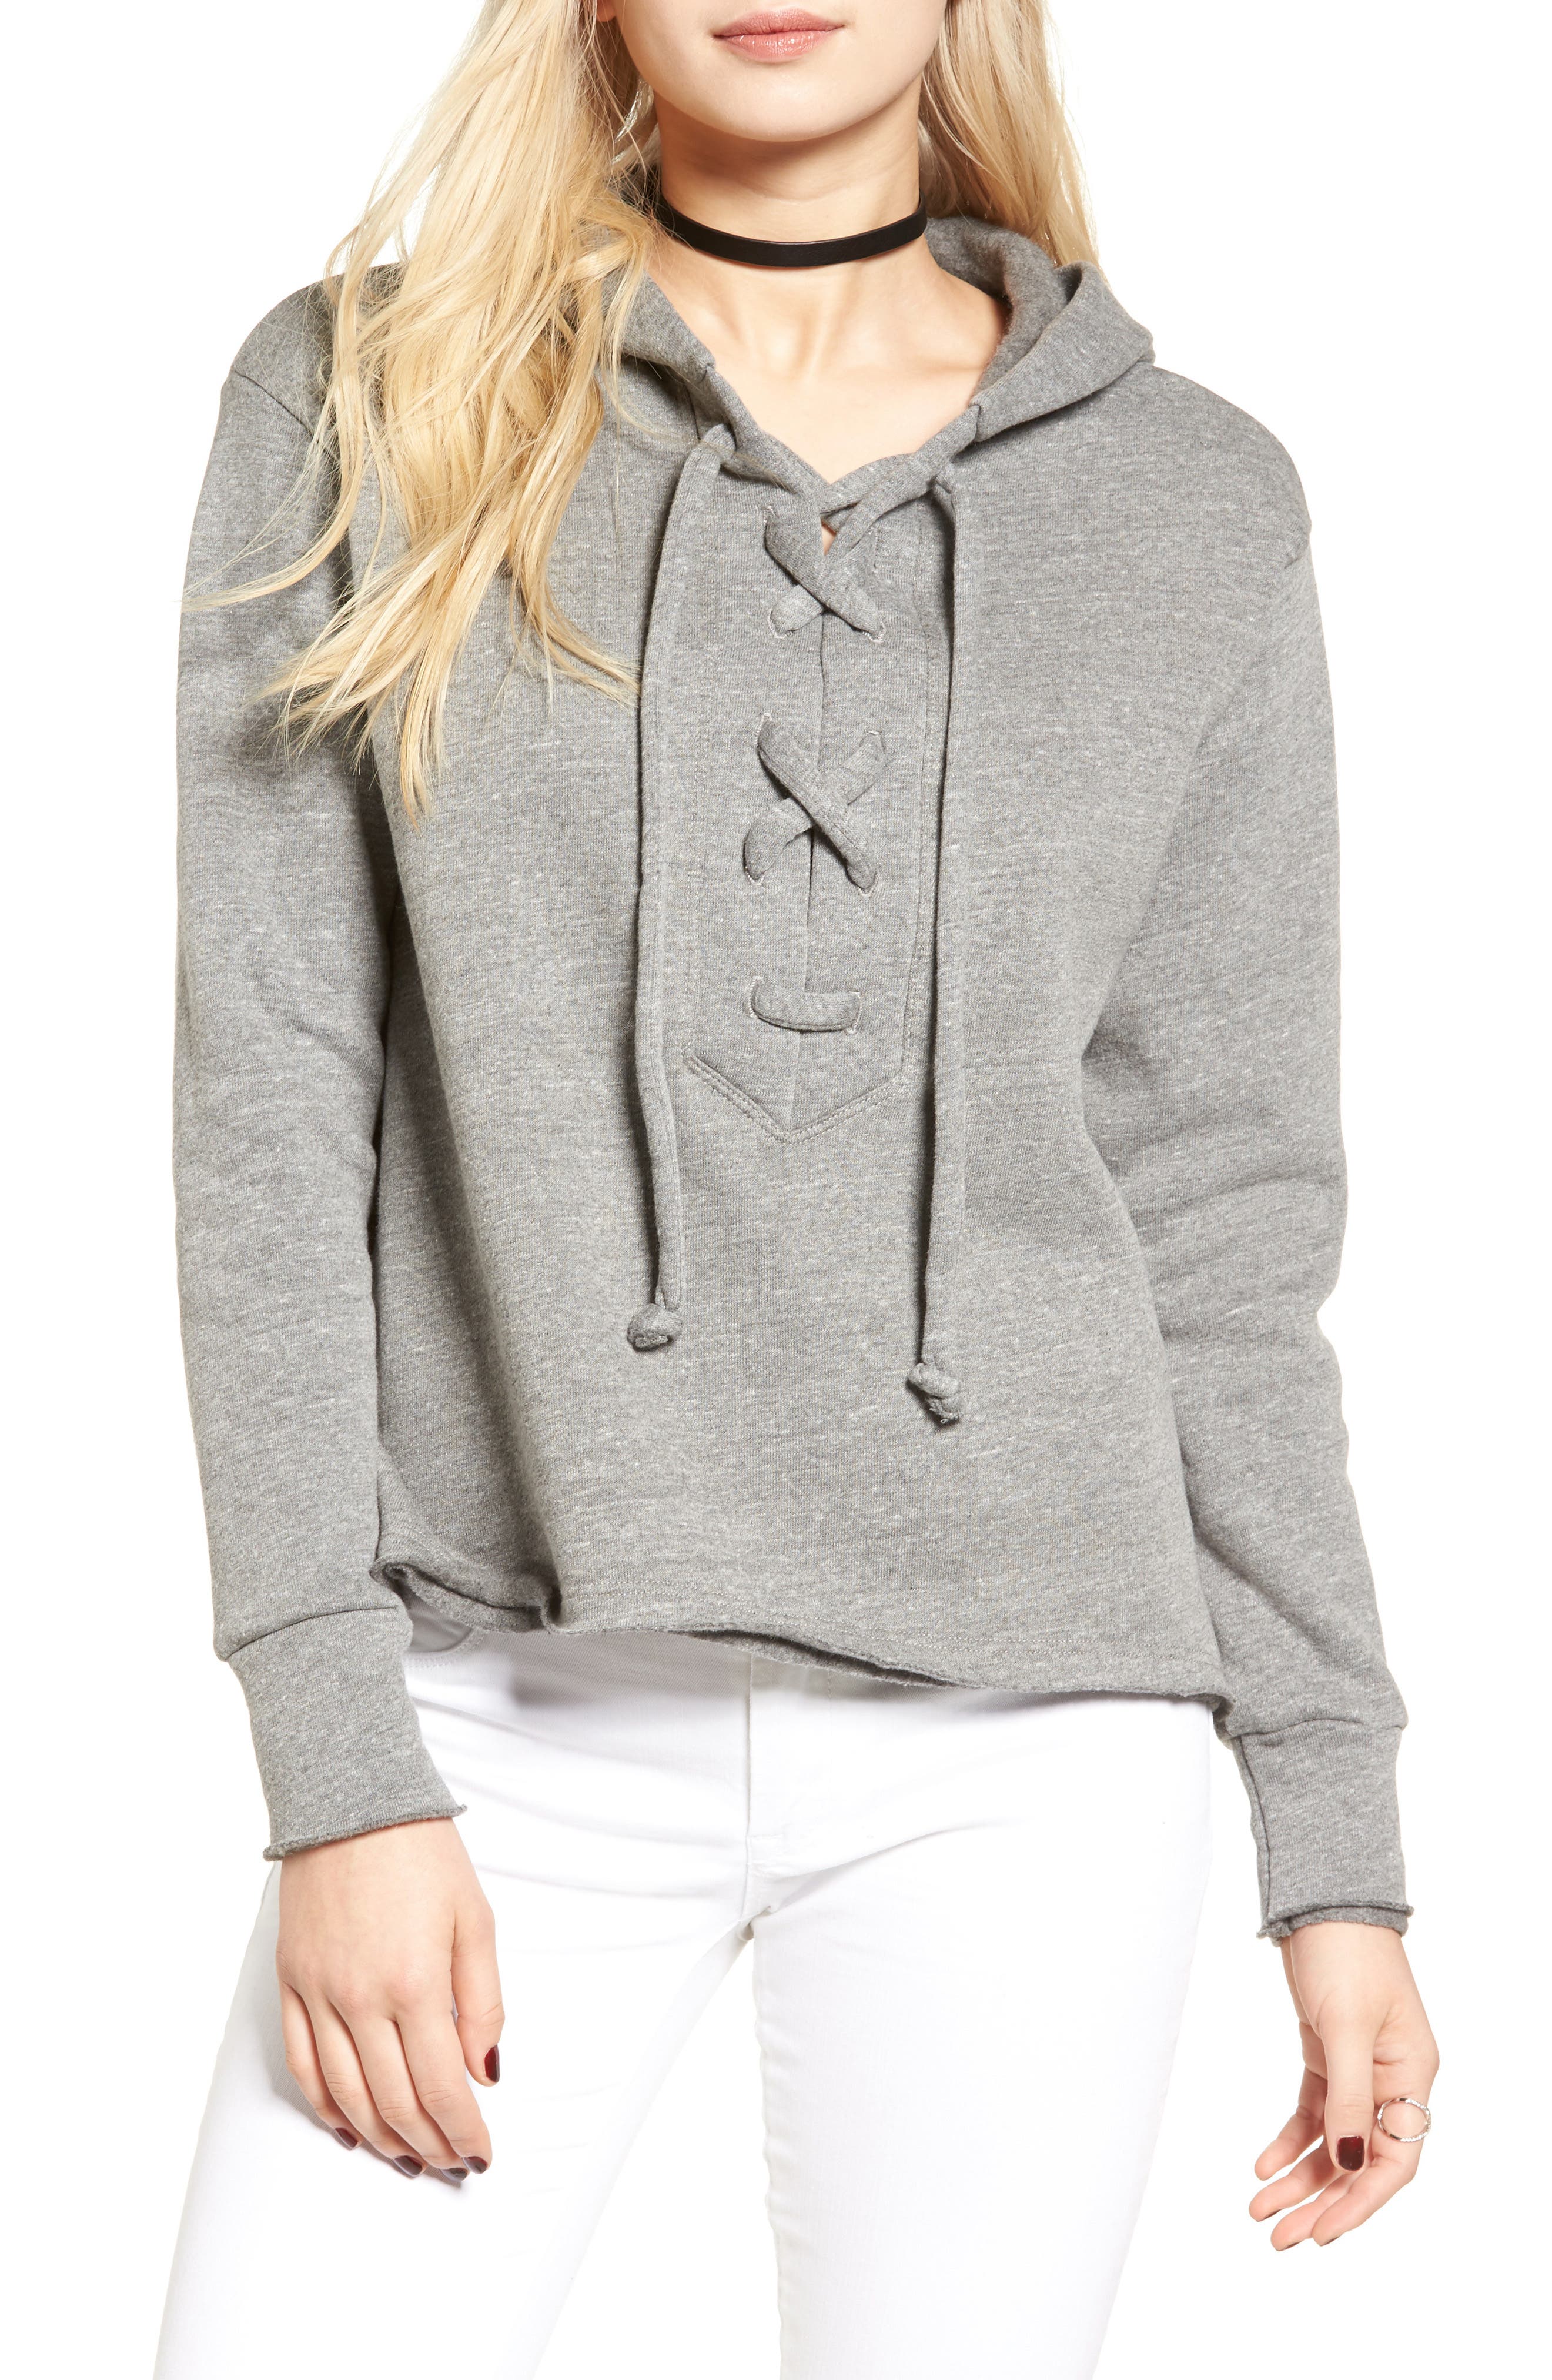 How to Dress Up Your Hoodie | Nordstrom Fashion Blog